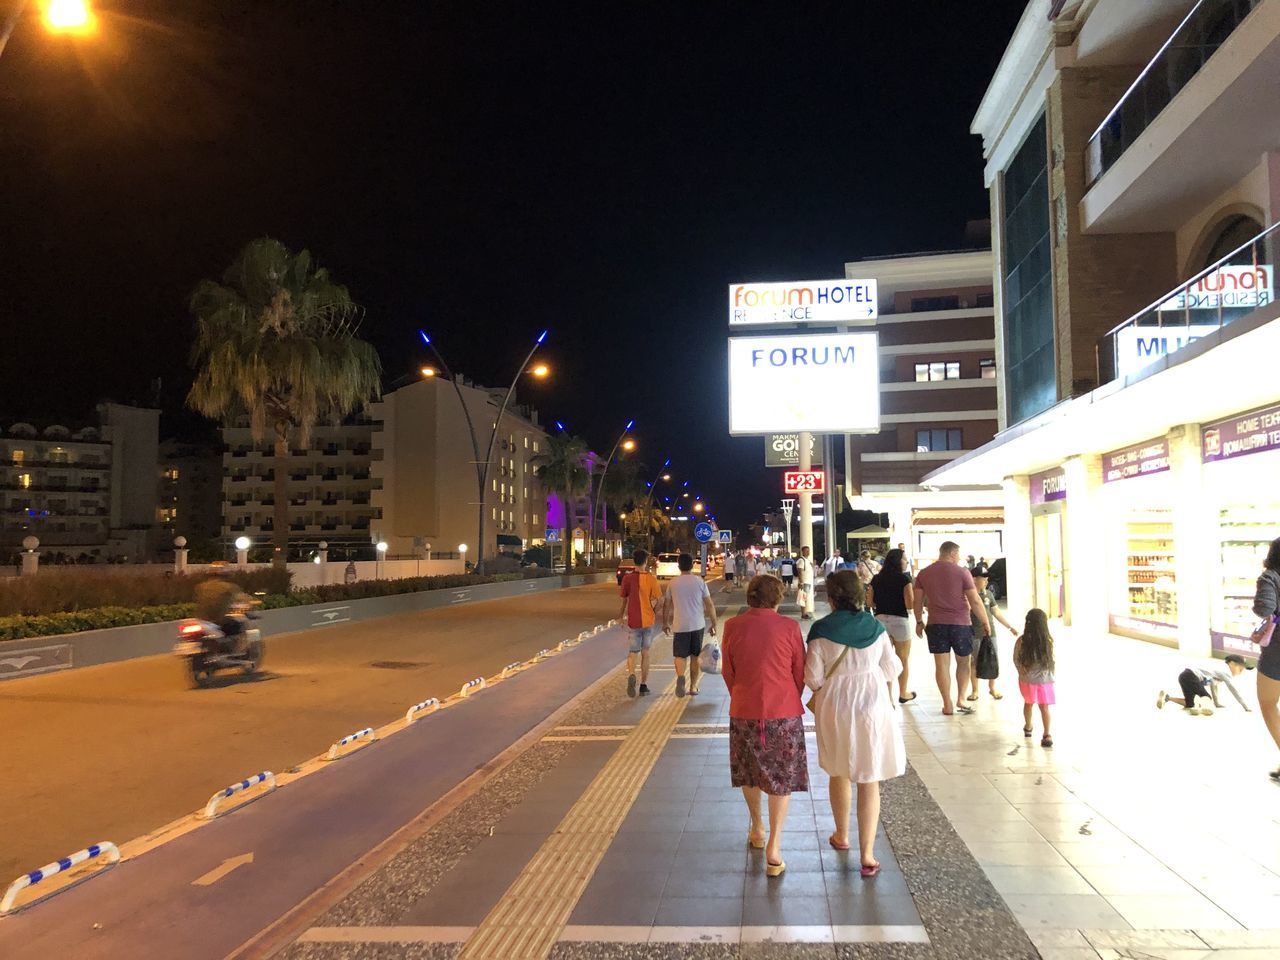 GROUP OF PEOPLE WALKING ON ROAD ALONG BUILDINGS AT NIGHT